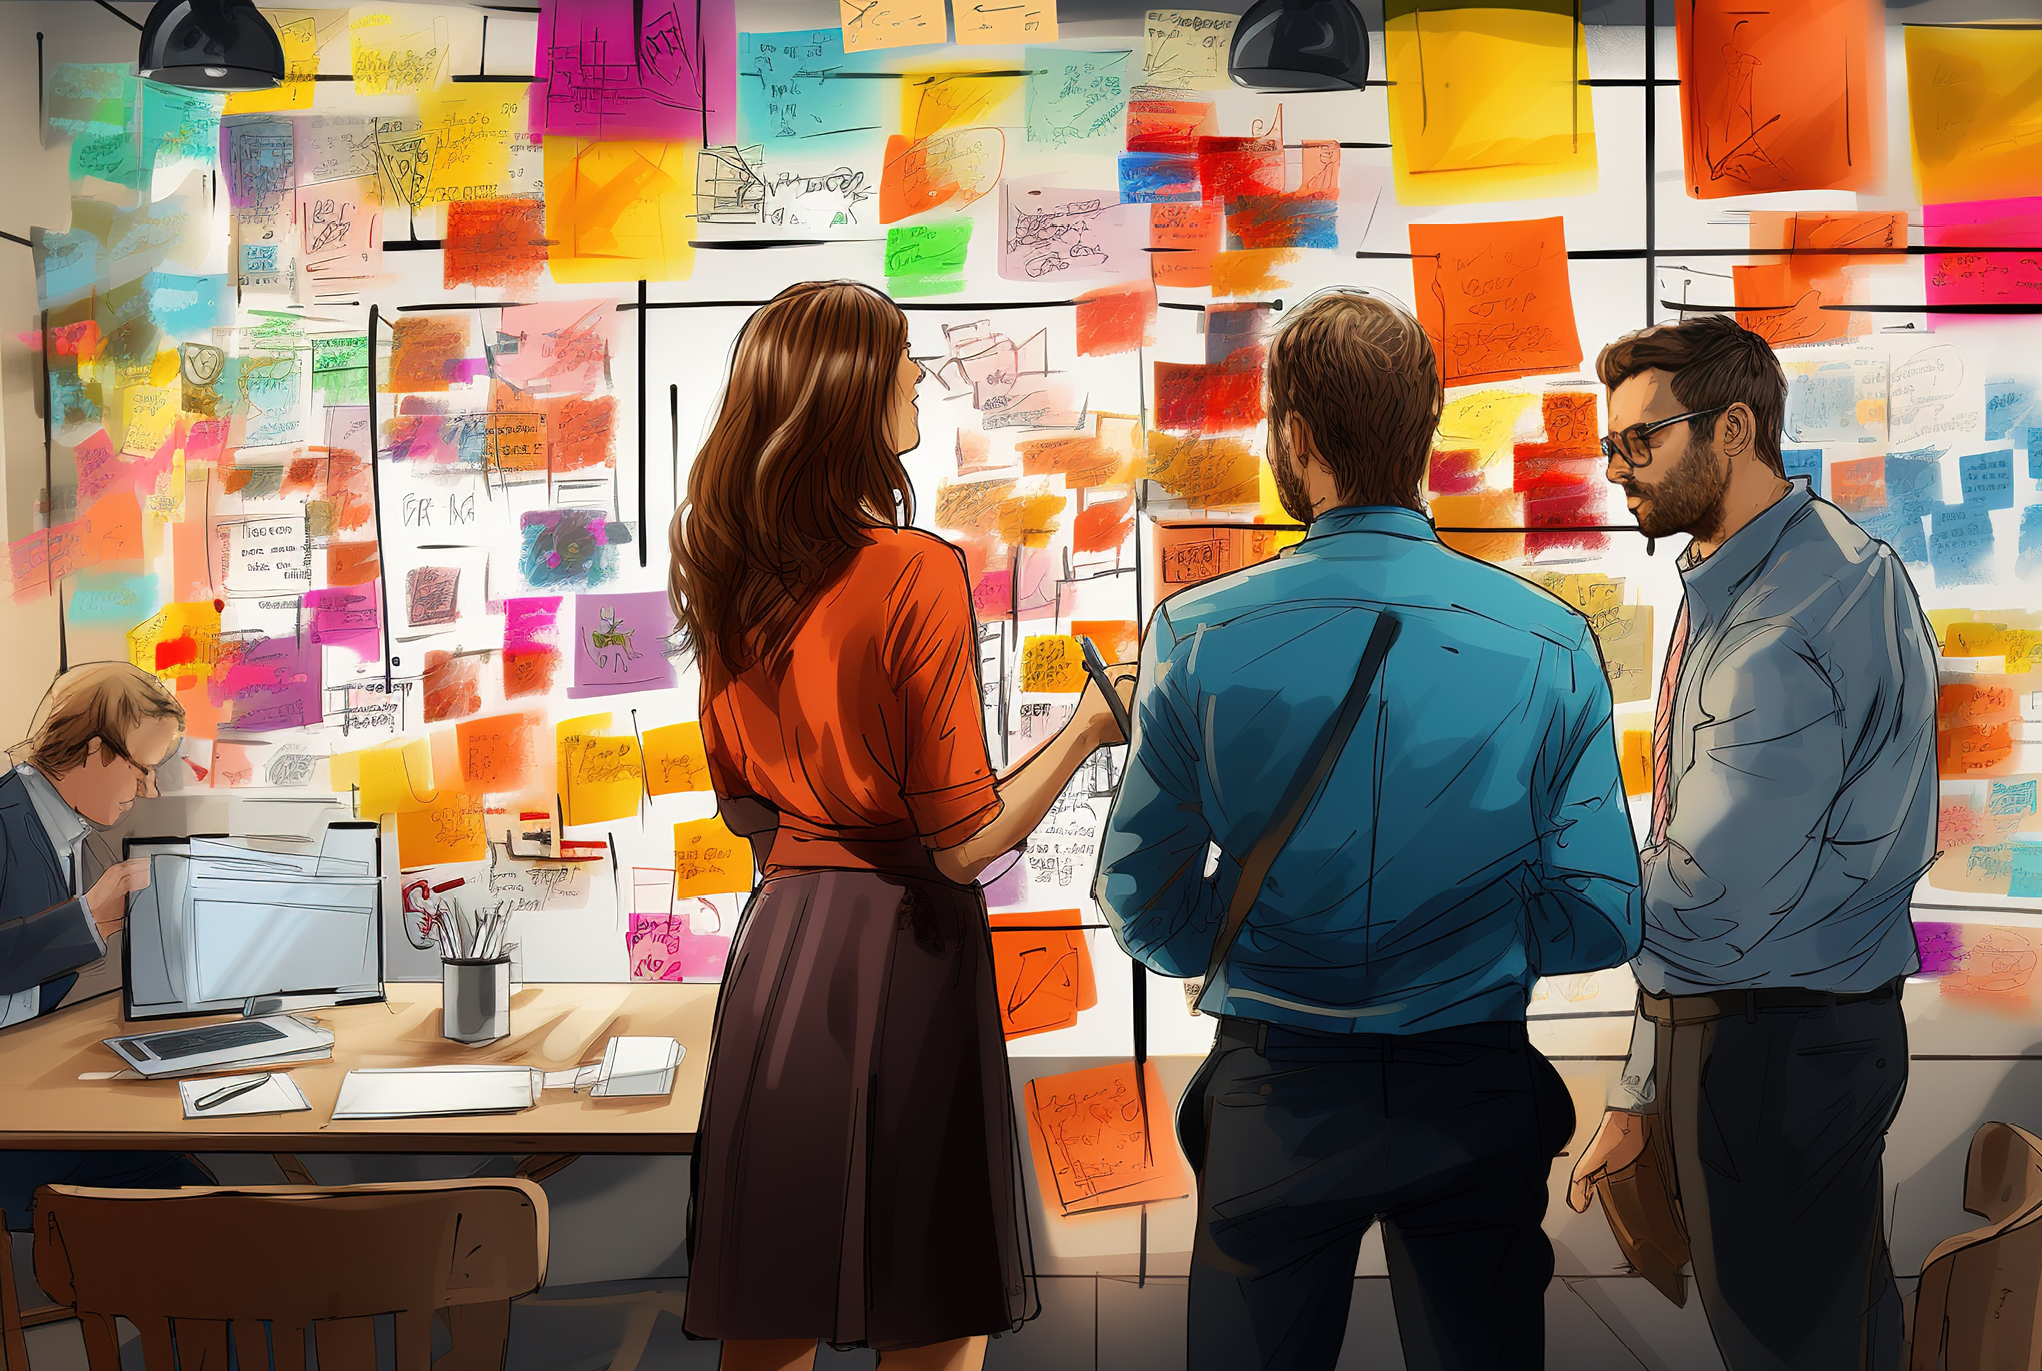 A group of people standing in front of a wall filled with pieces of paper and sticky notes